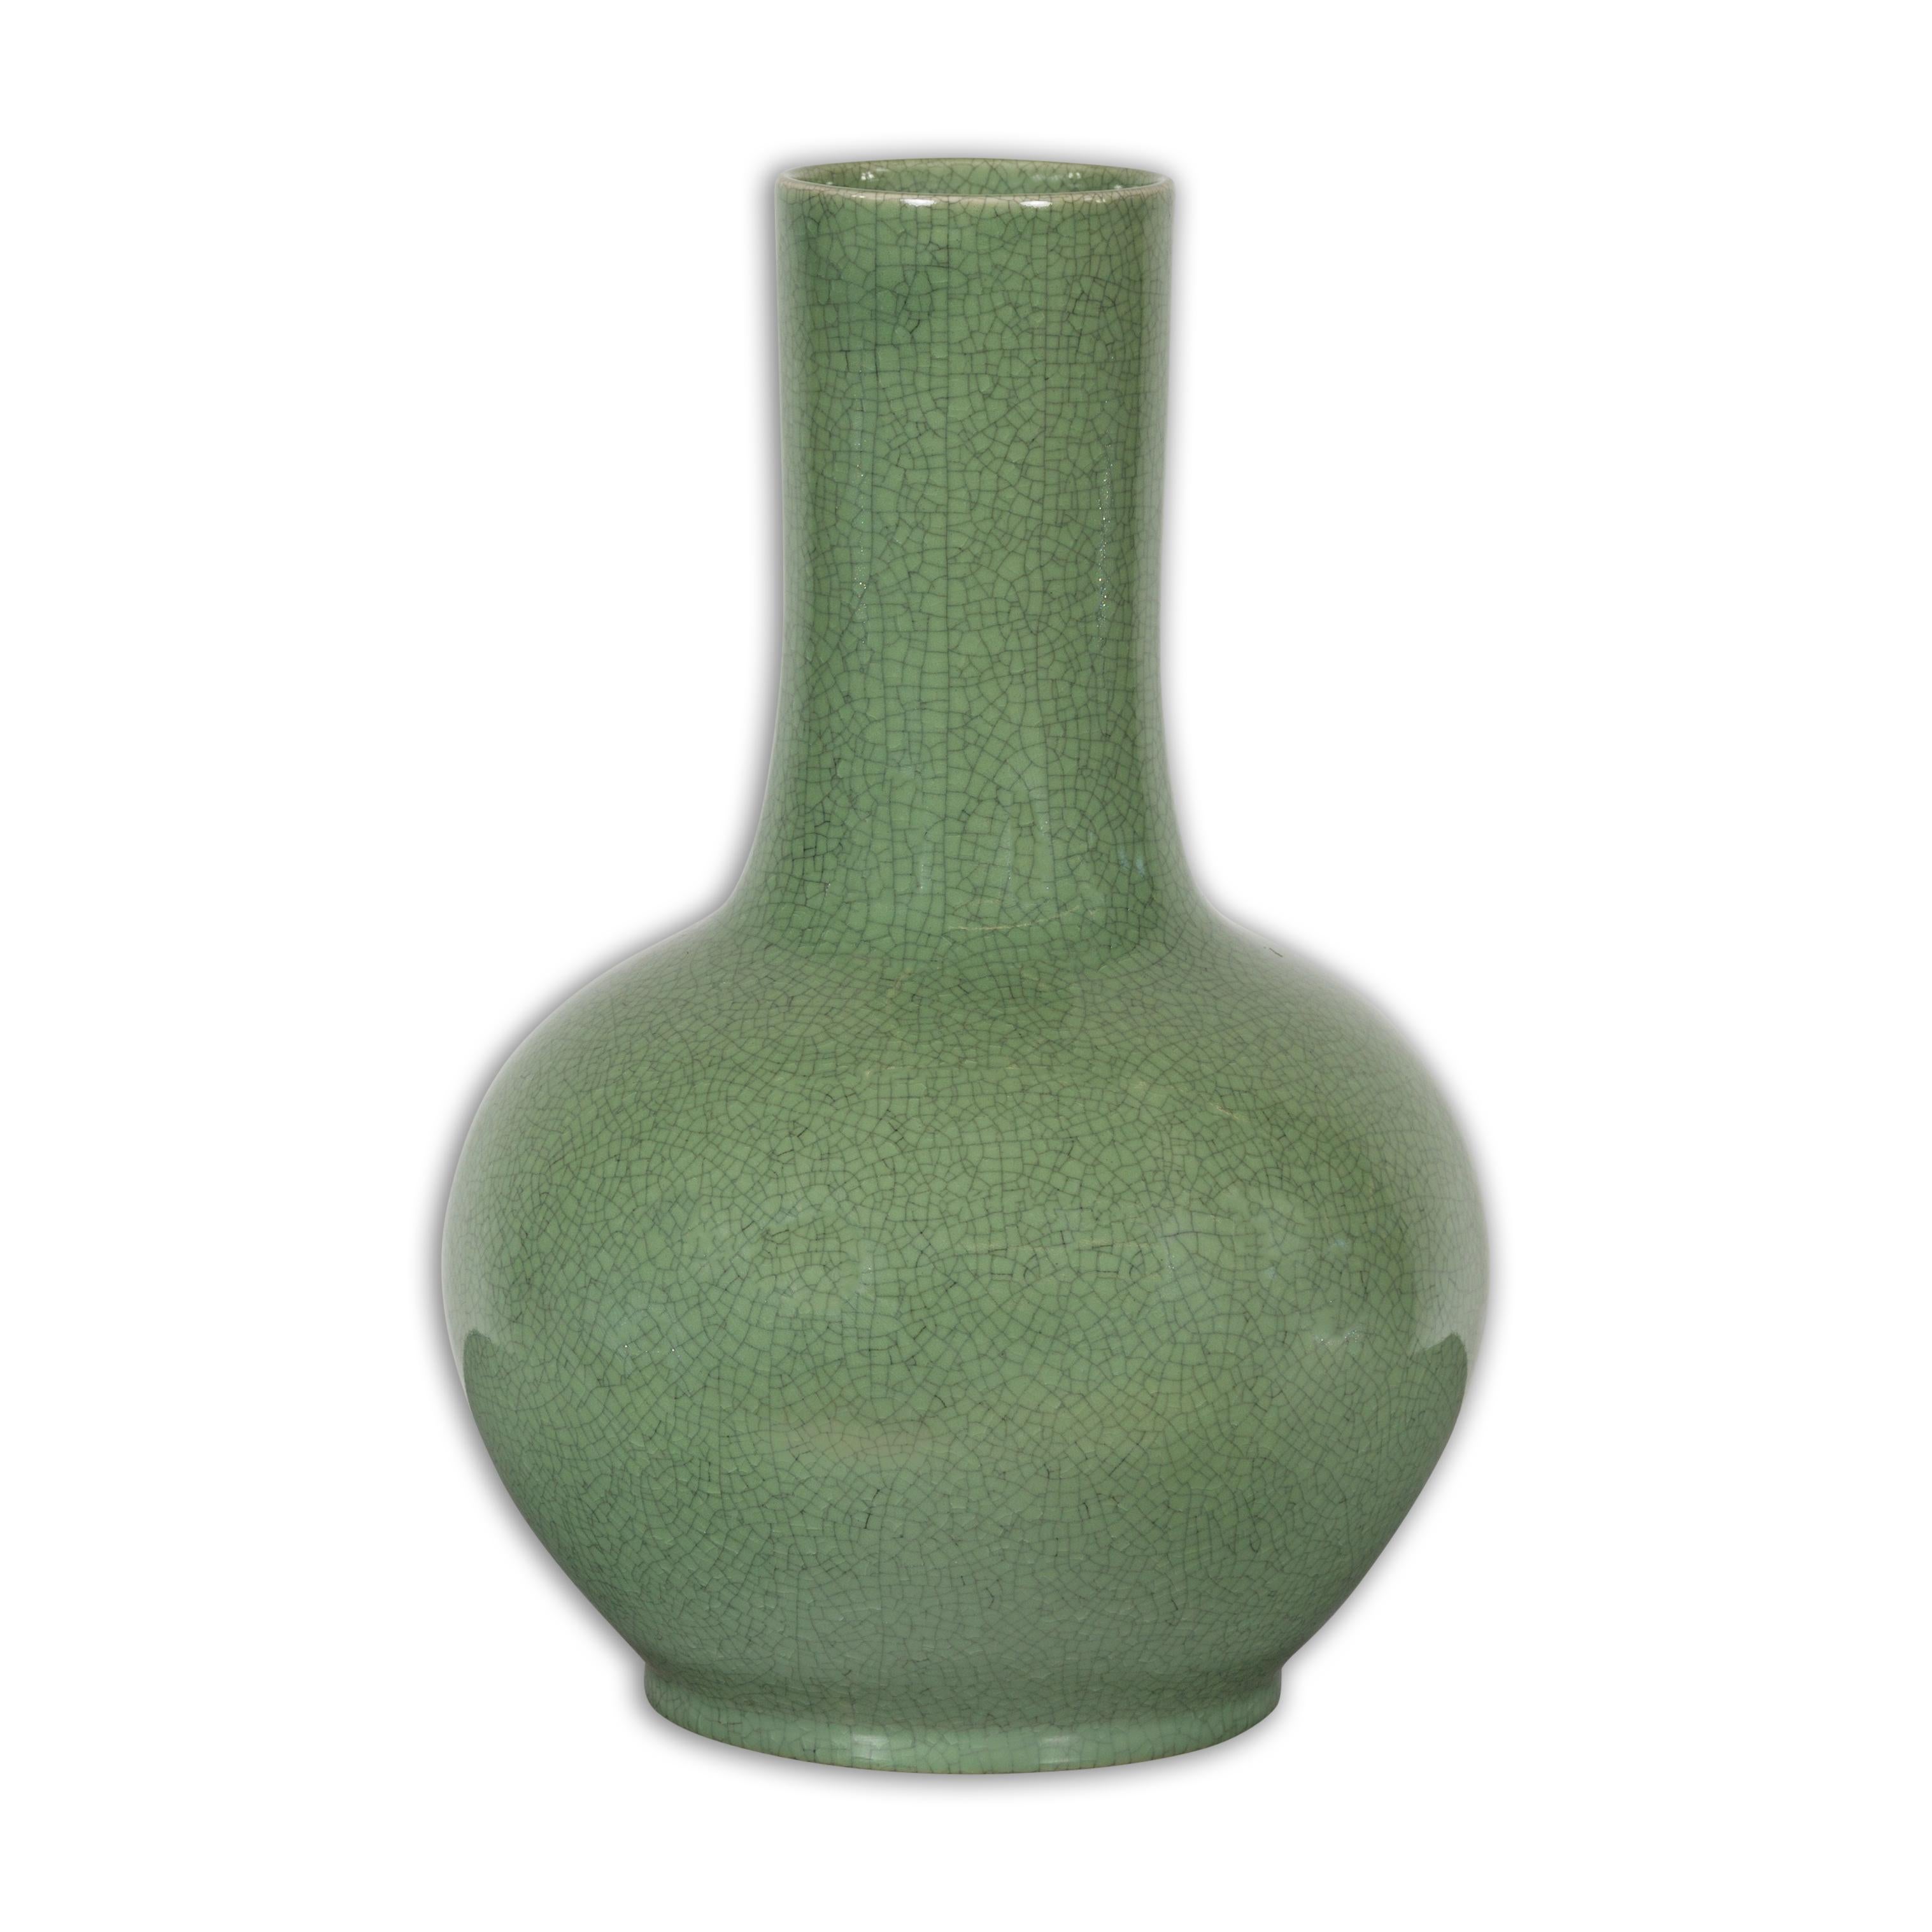 Chinese Vintage Ceramic Vase with Crackle Green Glaze and Narrow Neck 13